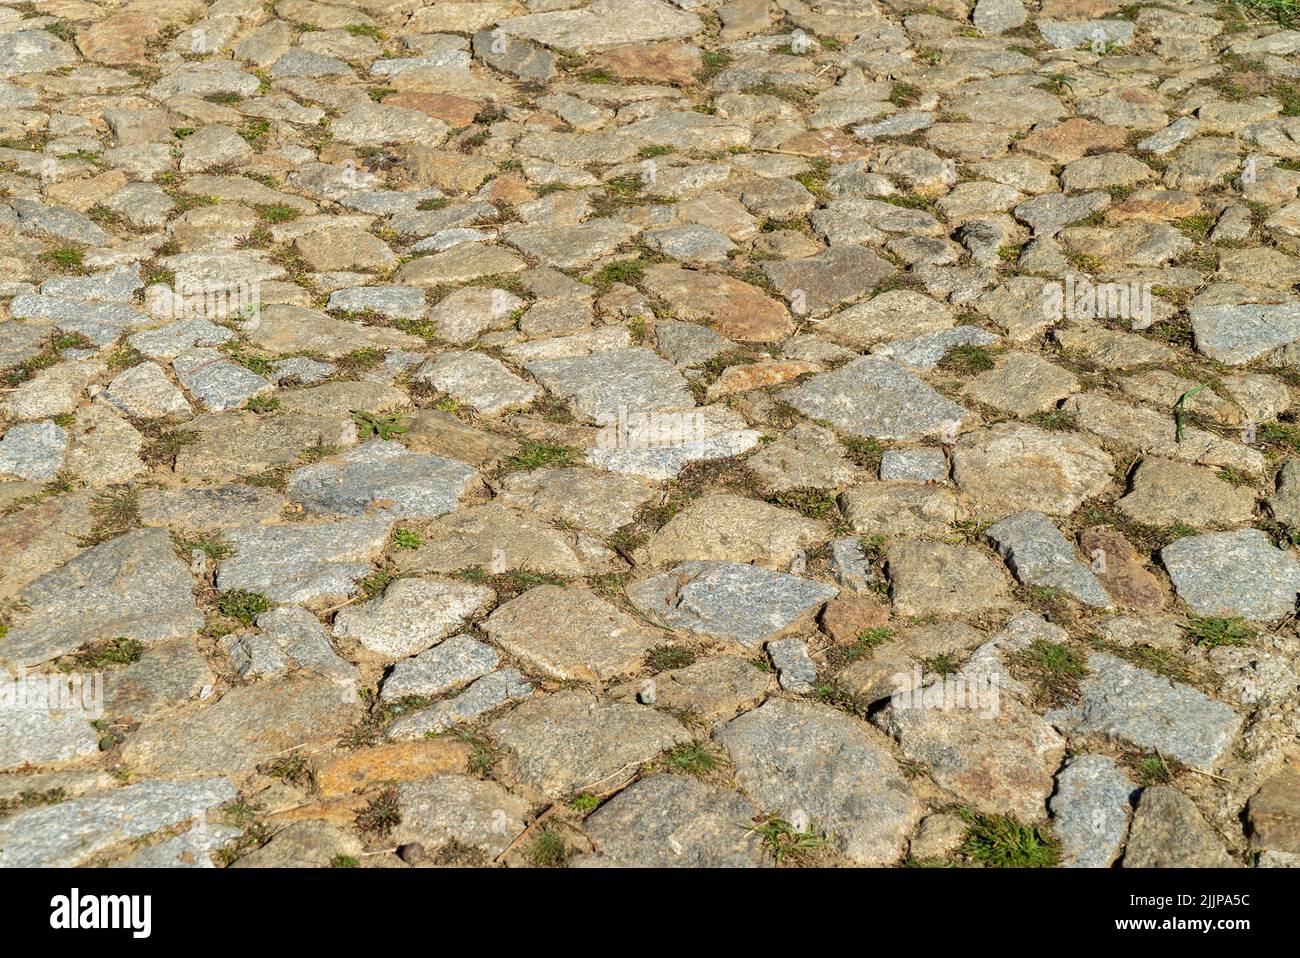 A high-angle shot of a stone ground texture on a sunny day Stock Photo